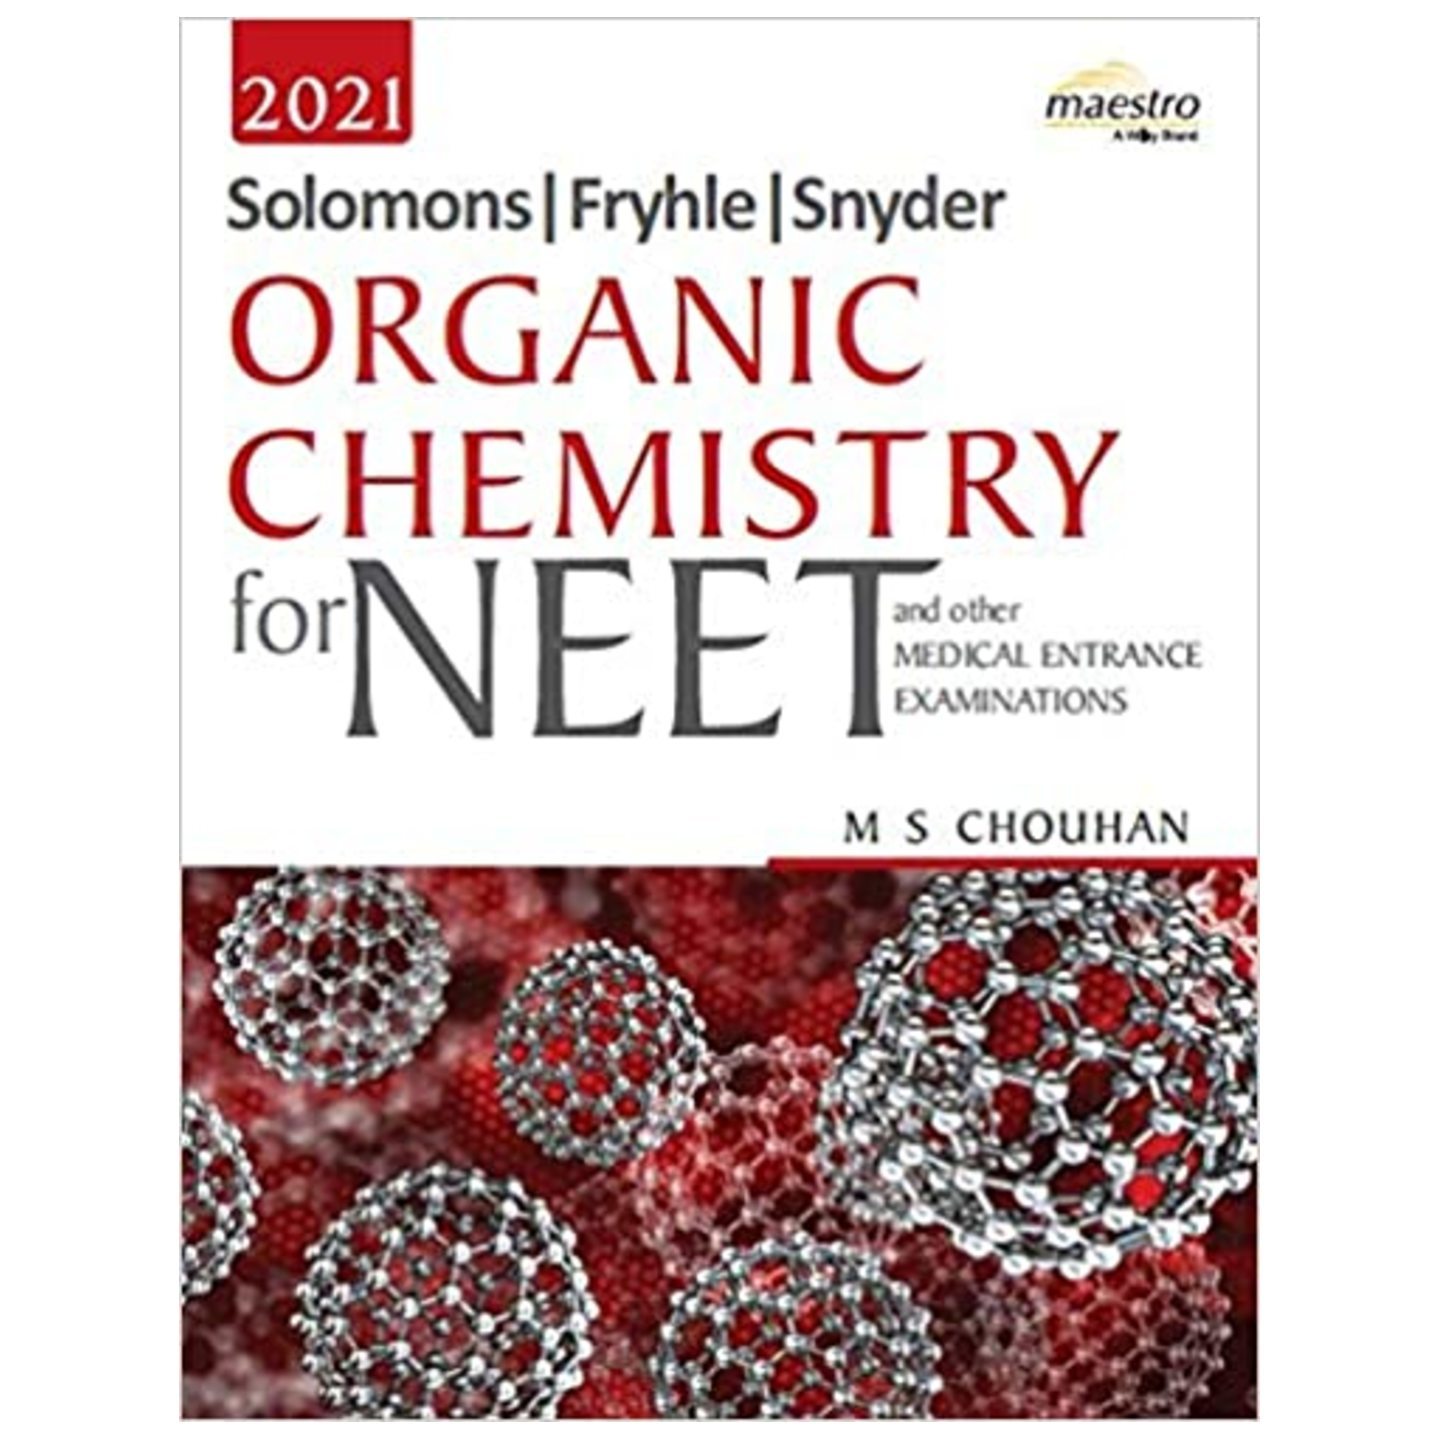 Wileys Solomons, Fryhle, Synder Organic Chemistry for NEET and other Medical Entrance Examinations